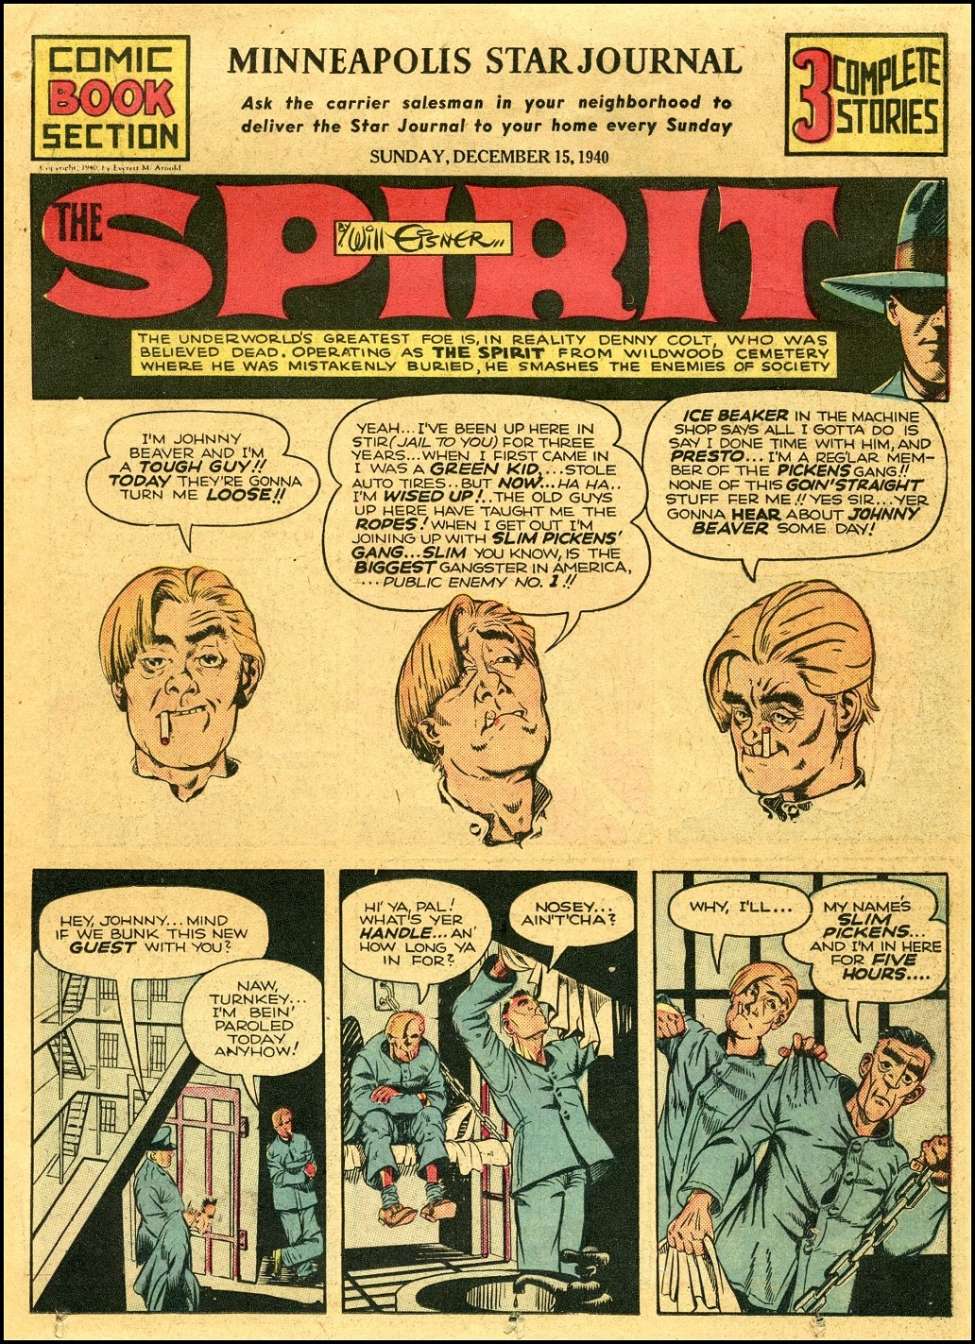 Comic Book Cover For The Spirit (1940-12-15) - Minneapolis Star Journal